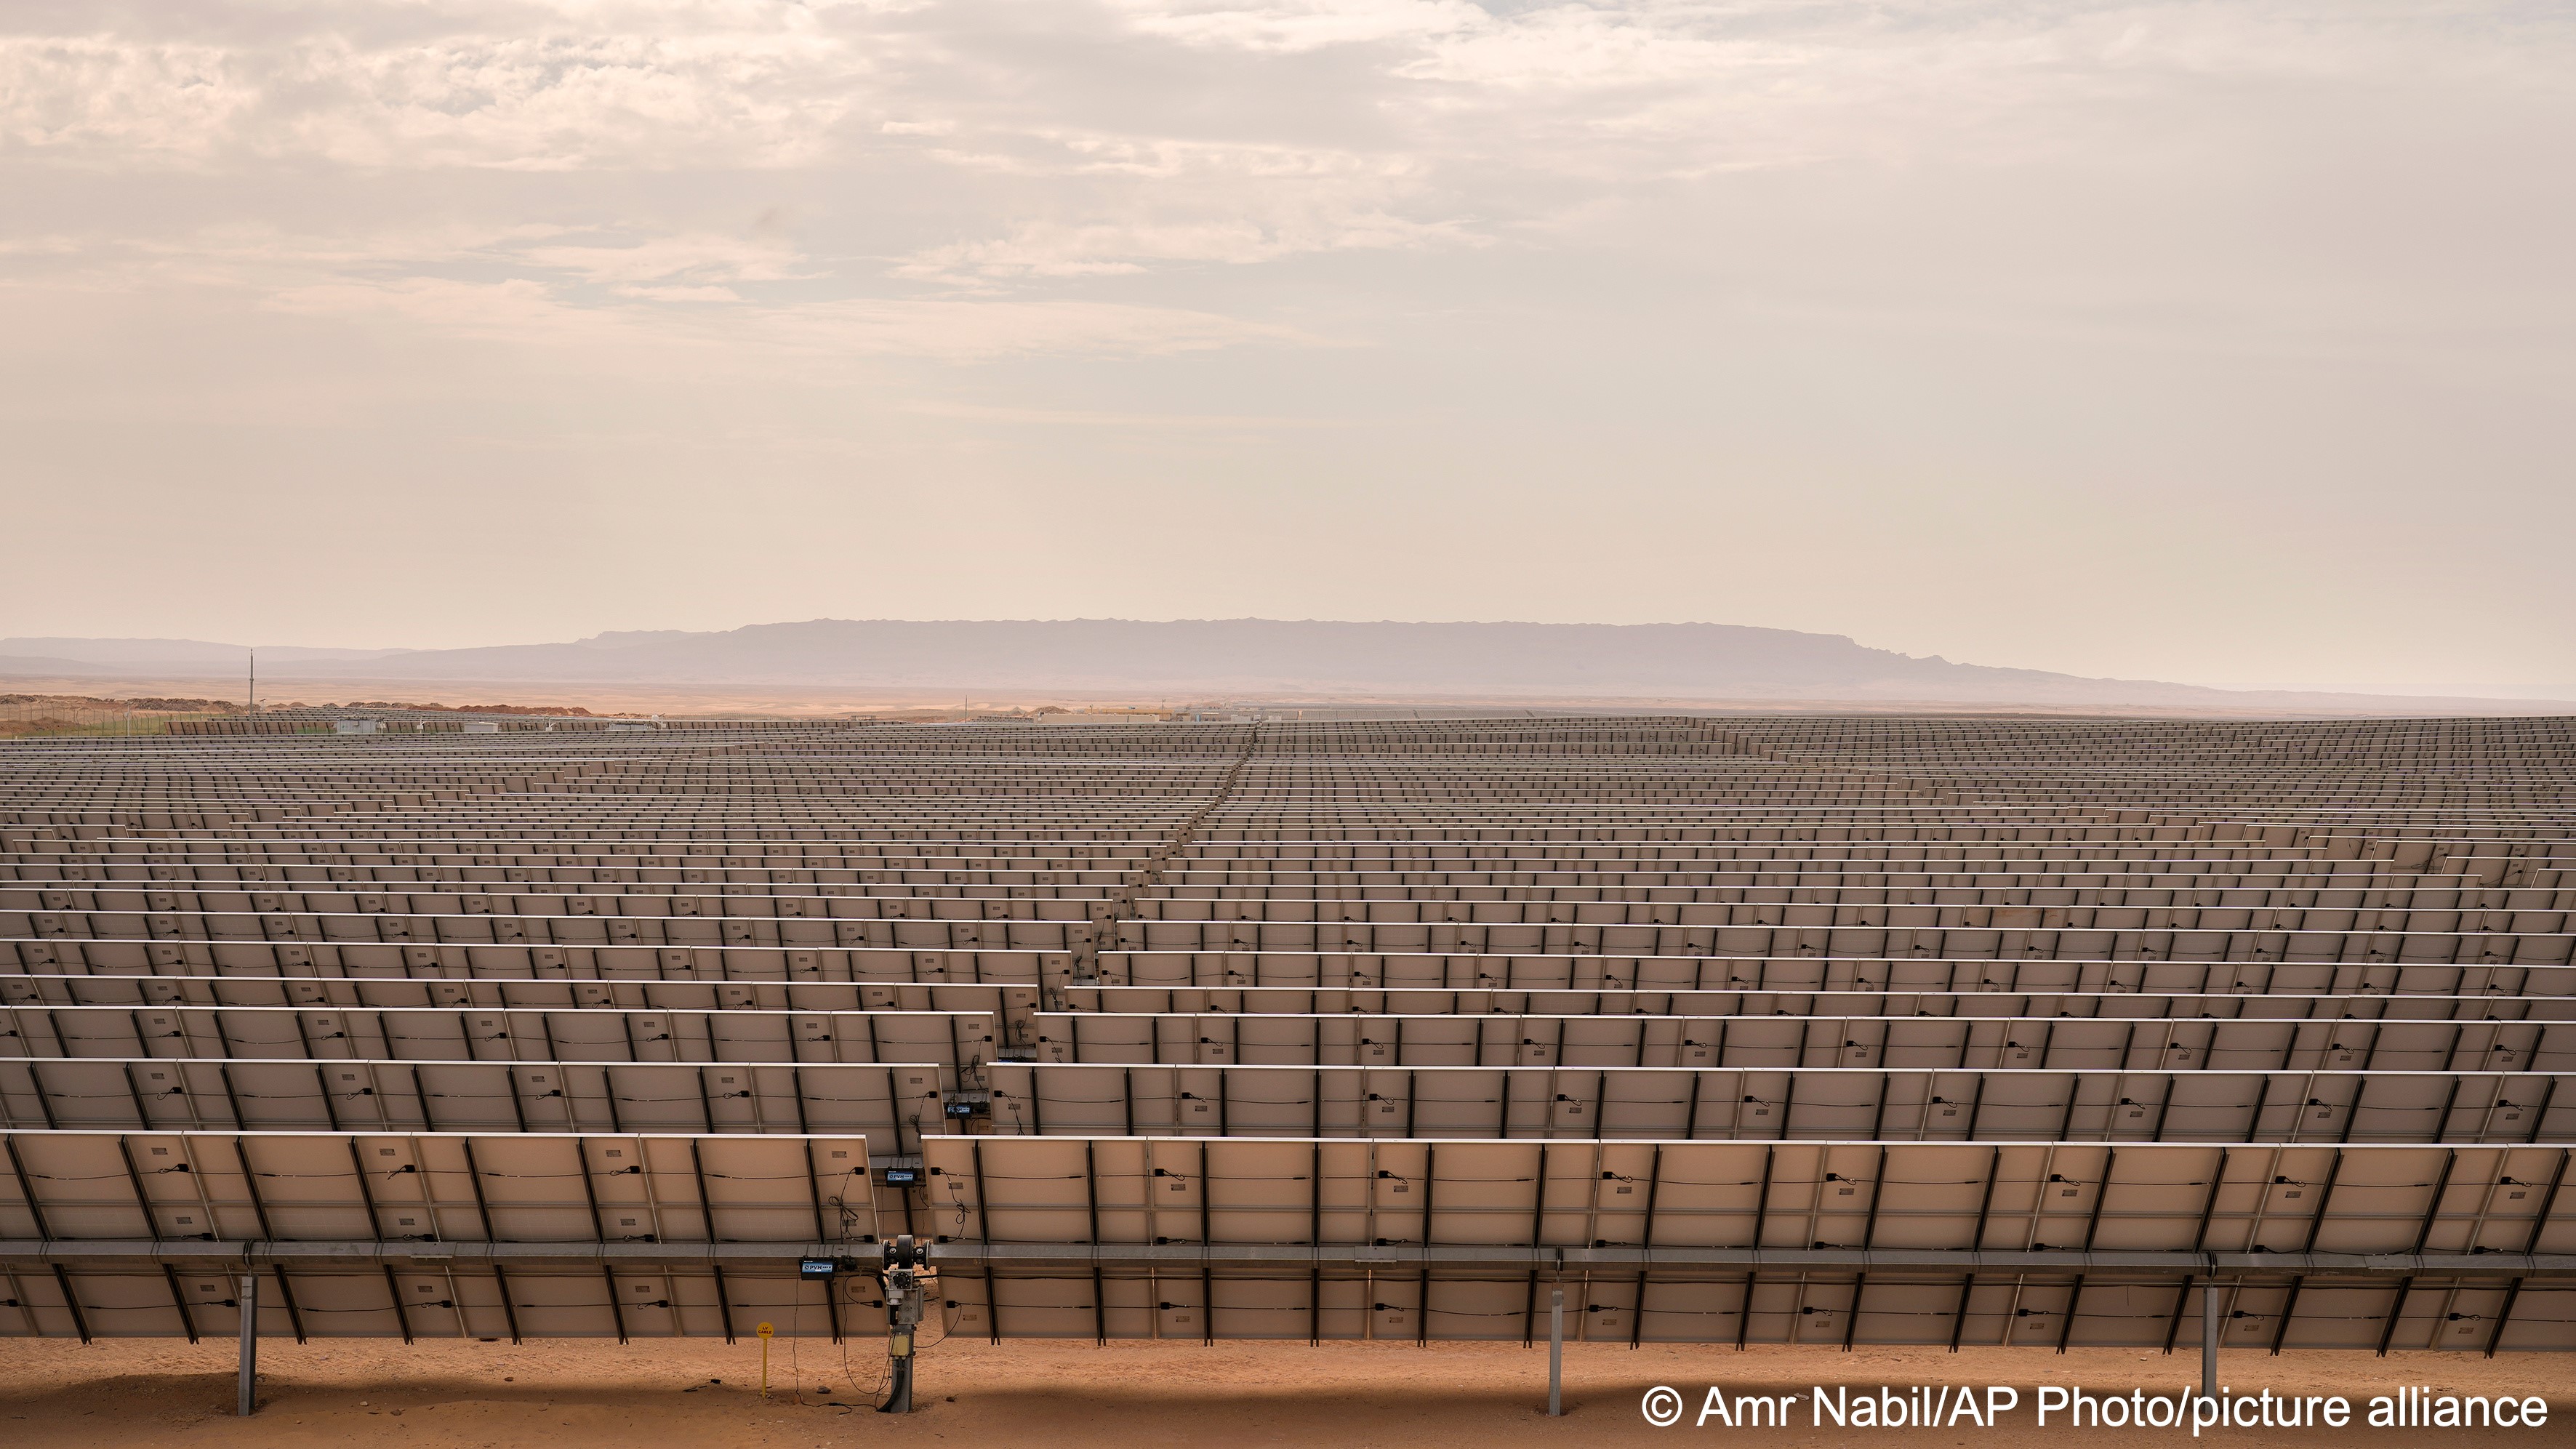 Thousands of photovoltaic solar panels generate electricity at Benban Solar Park, one of the world’s largest solar power plant in the world, in Aswan, Egypt, 19 October 2022 (photo: AP Photo/Amr Nabil)